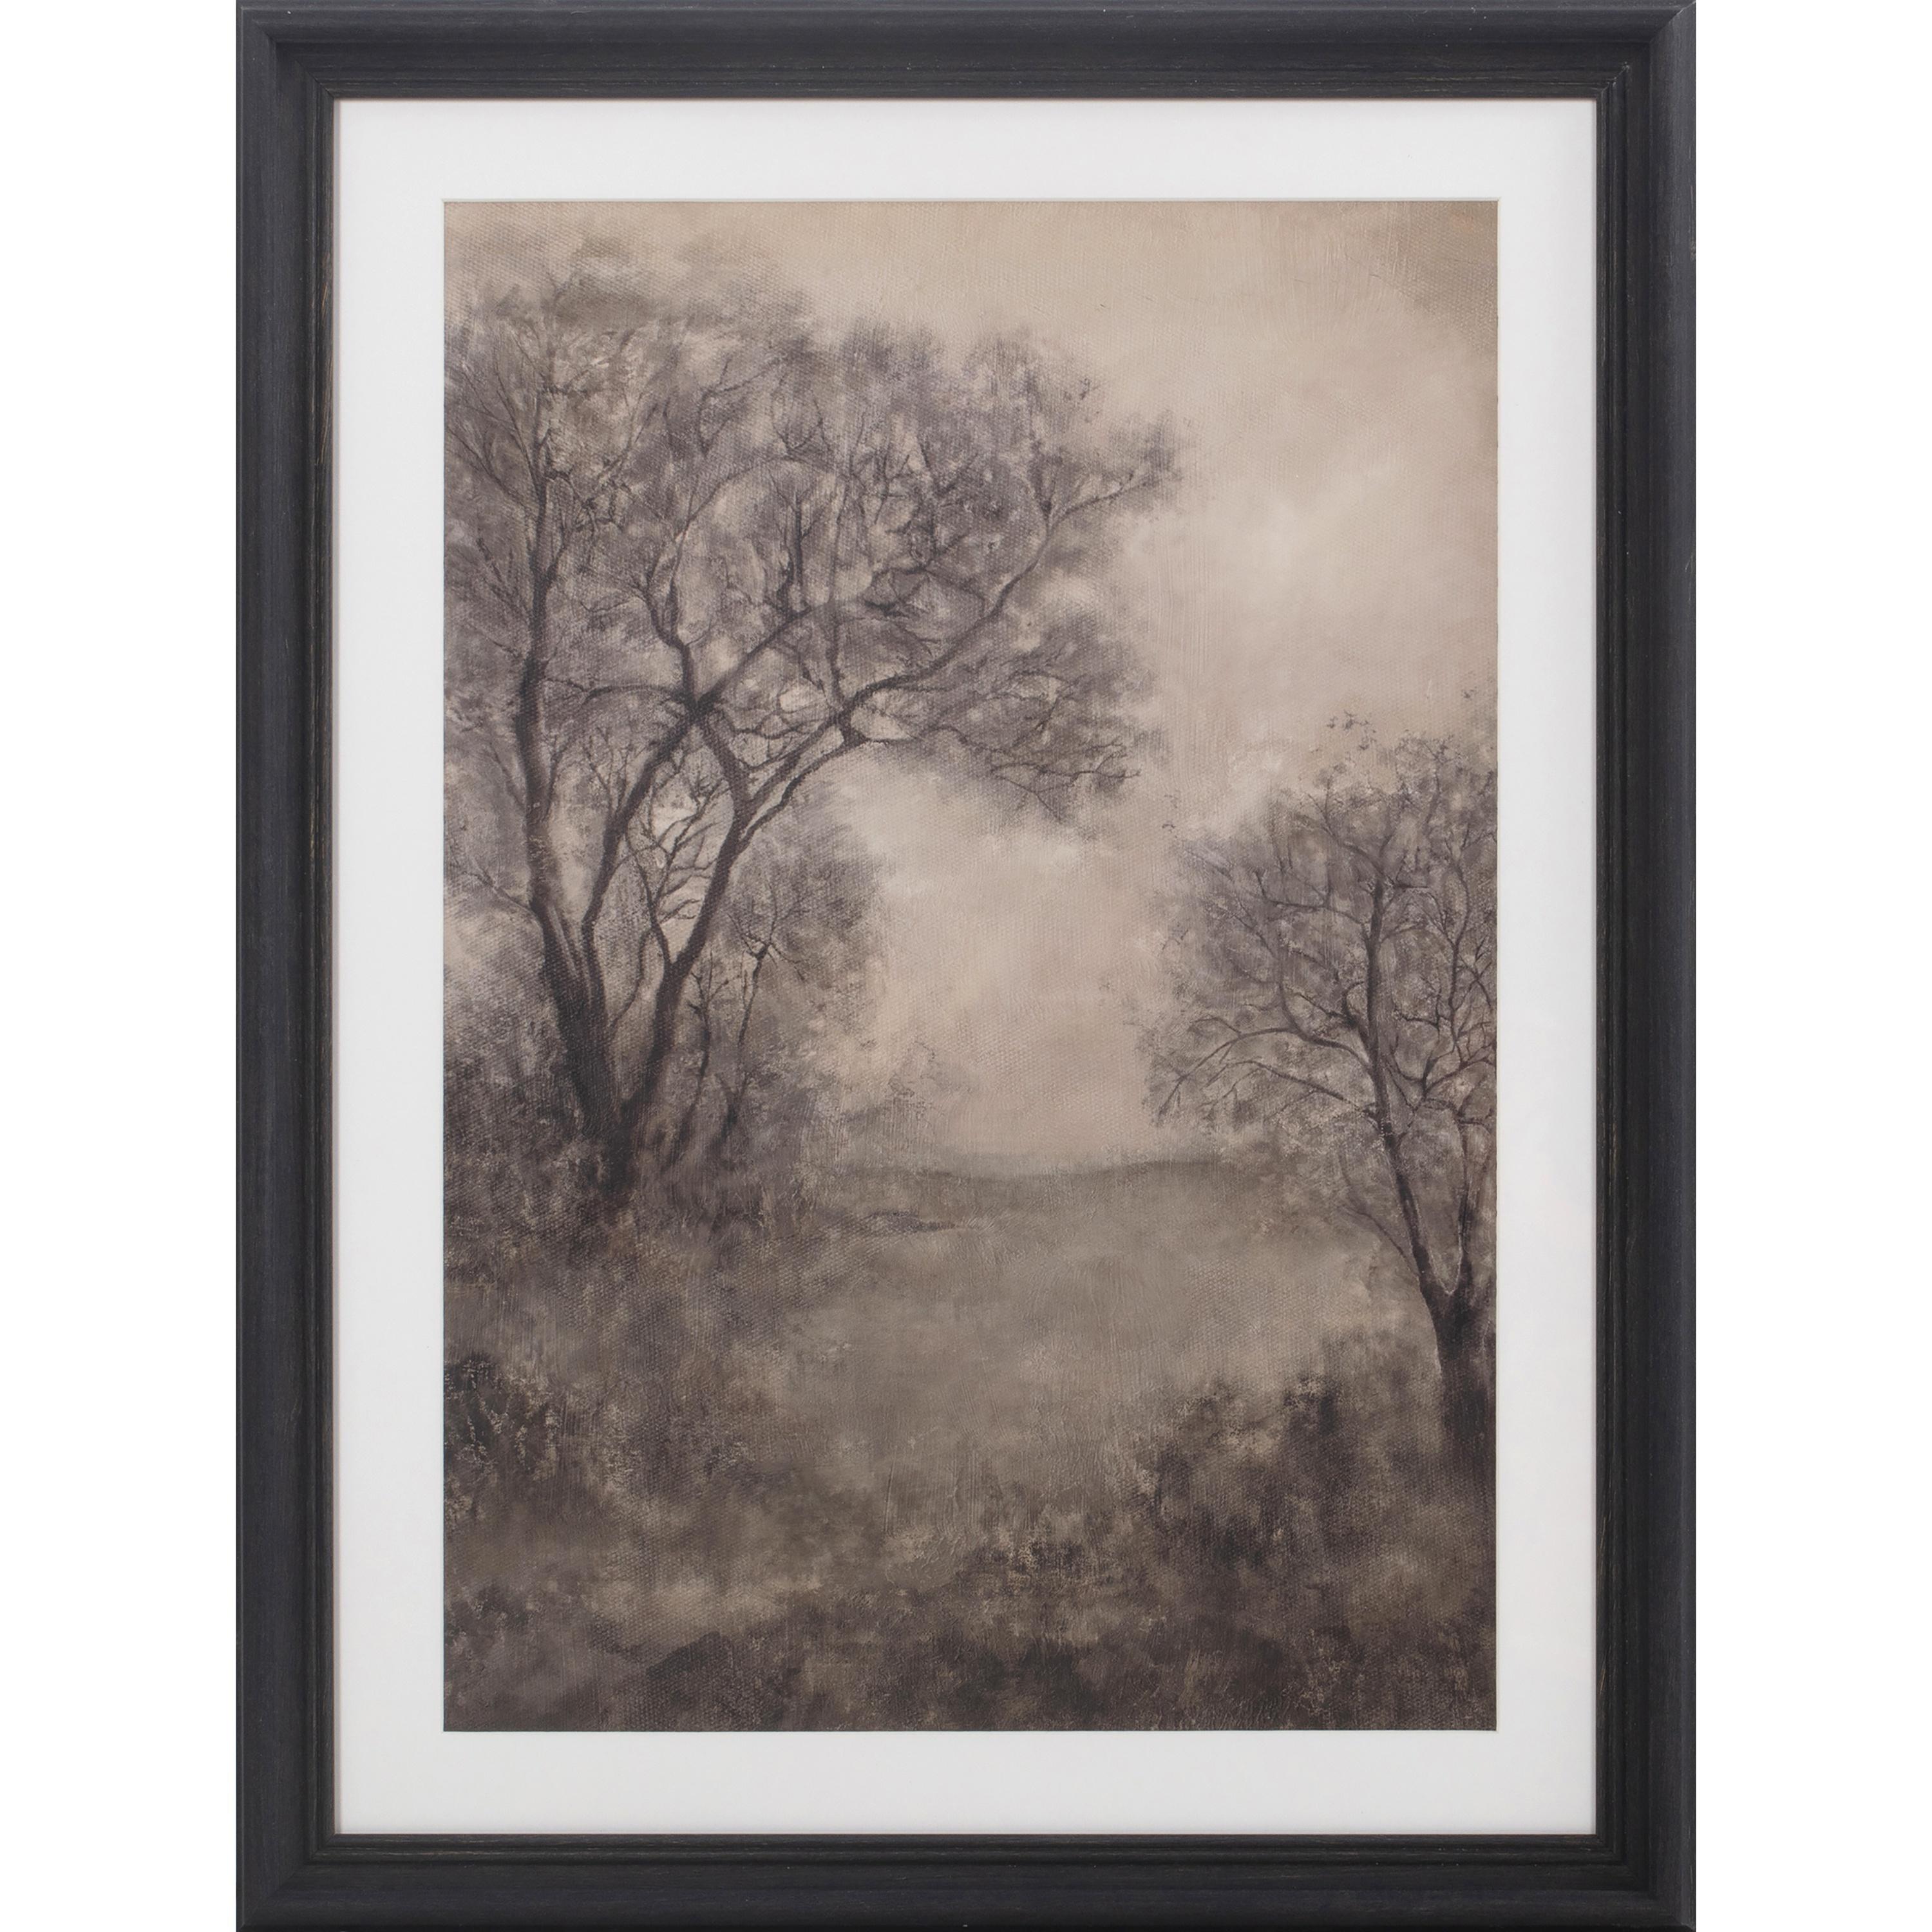 My Texas House Sepia Treescape Framed Art 18" x 24" - image 1 of 5